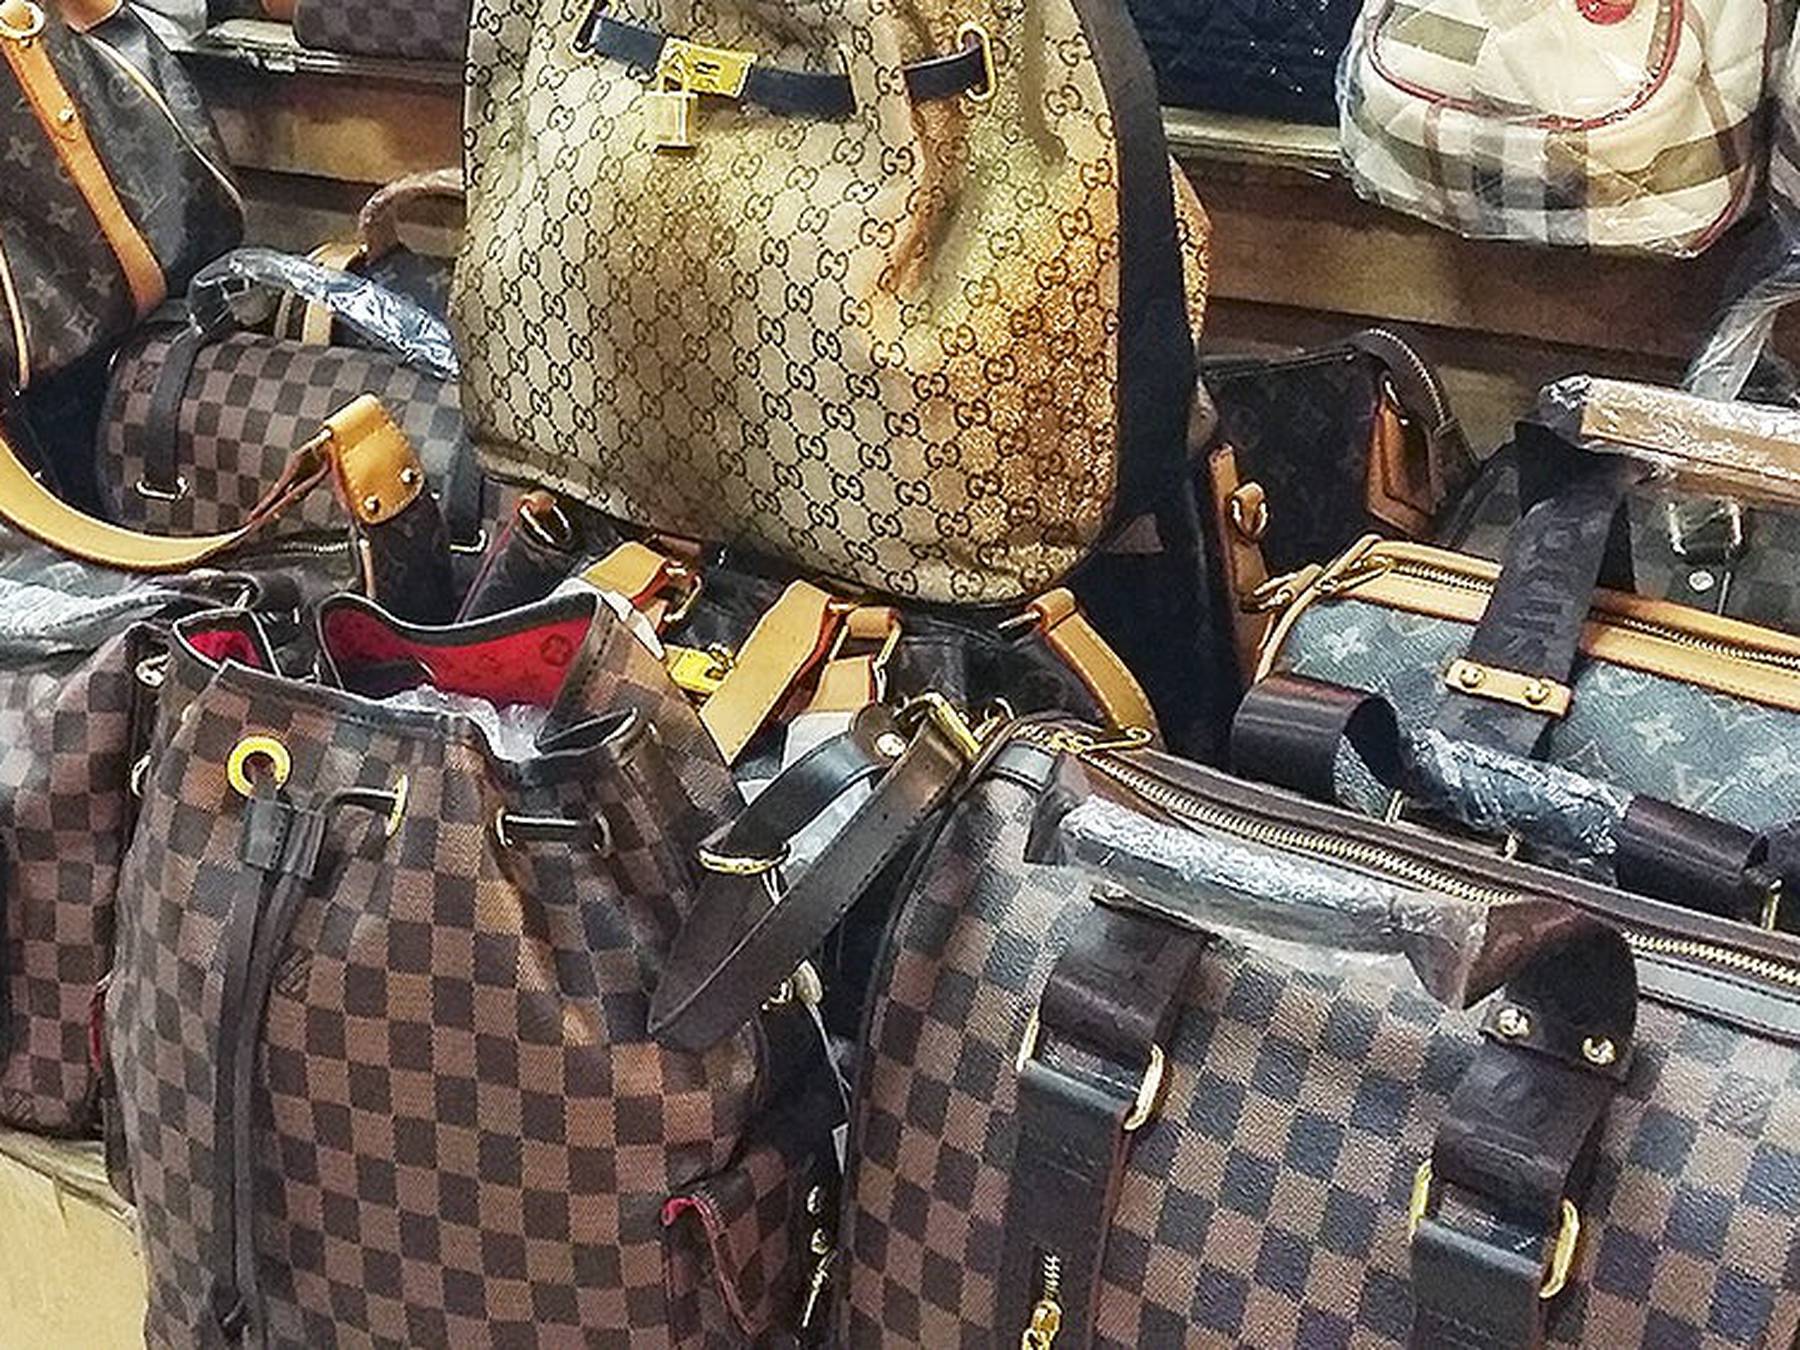 Scammers have turned Instagram into a showroom for luxury counterfeits